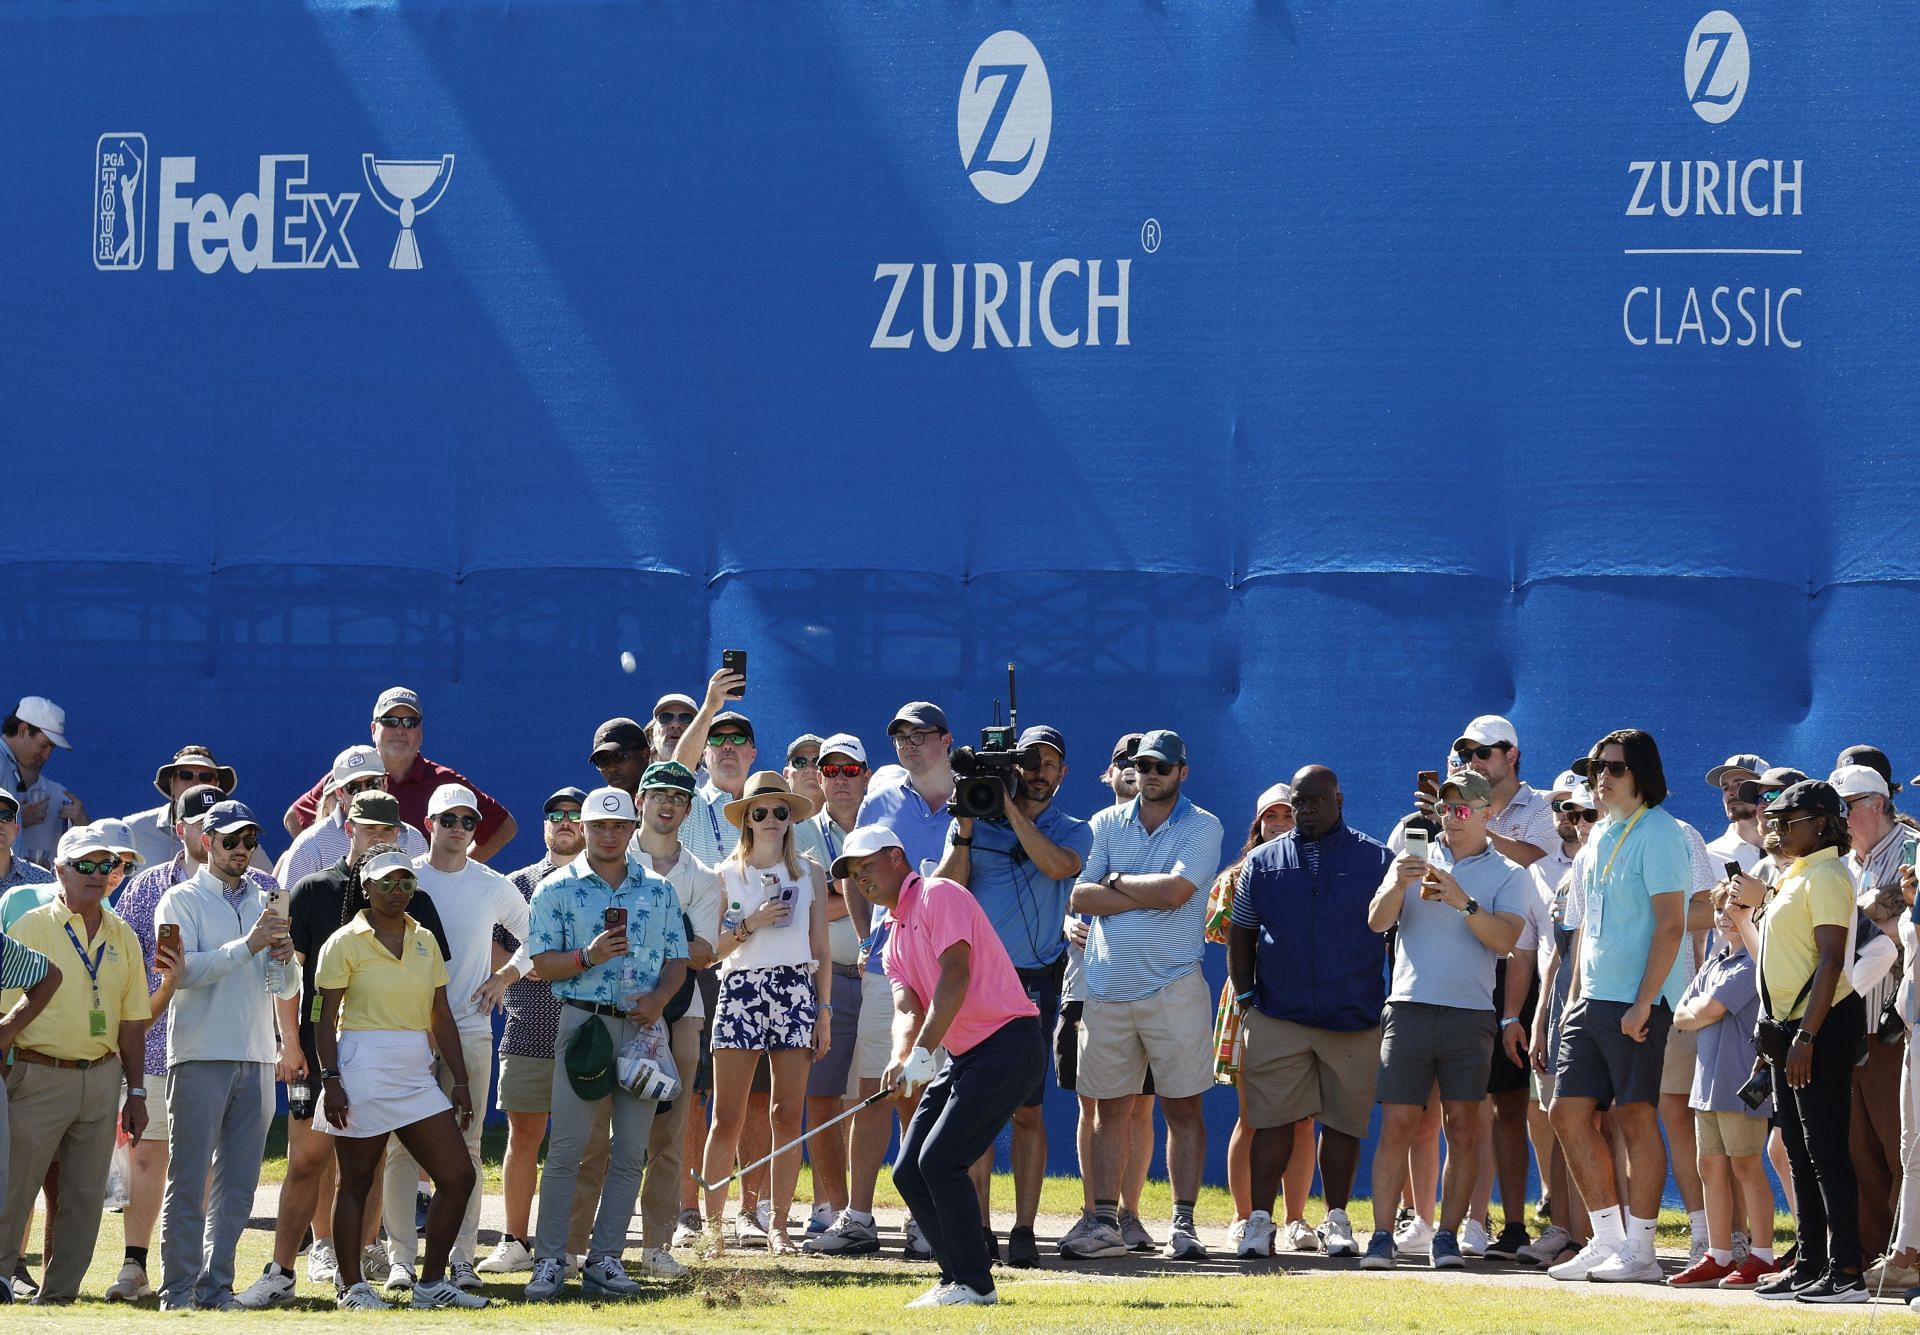 2023 Zurich Classic Sunday tee times and TV schedule explored